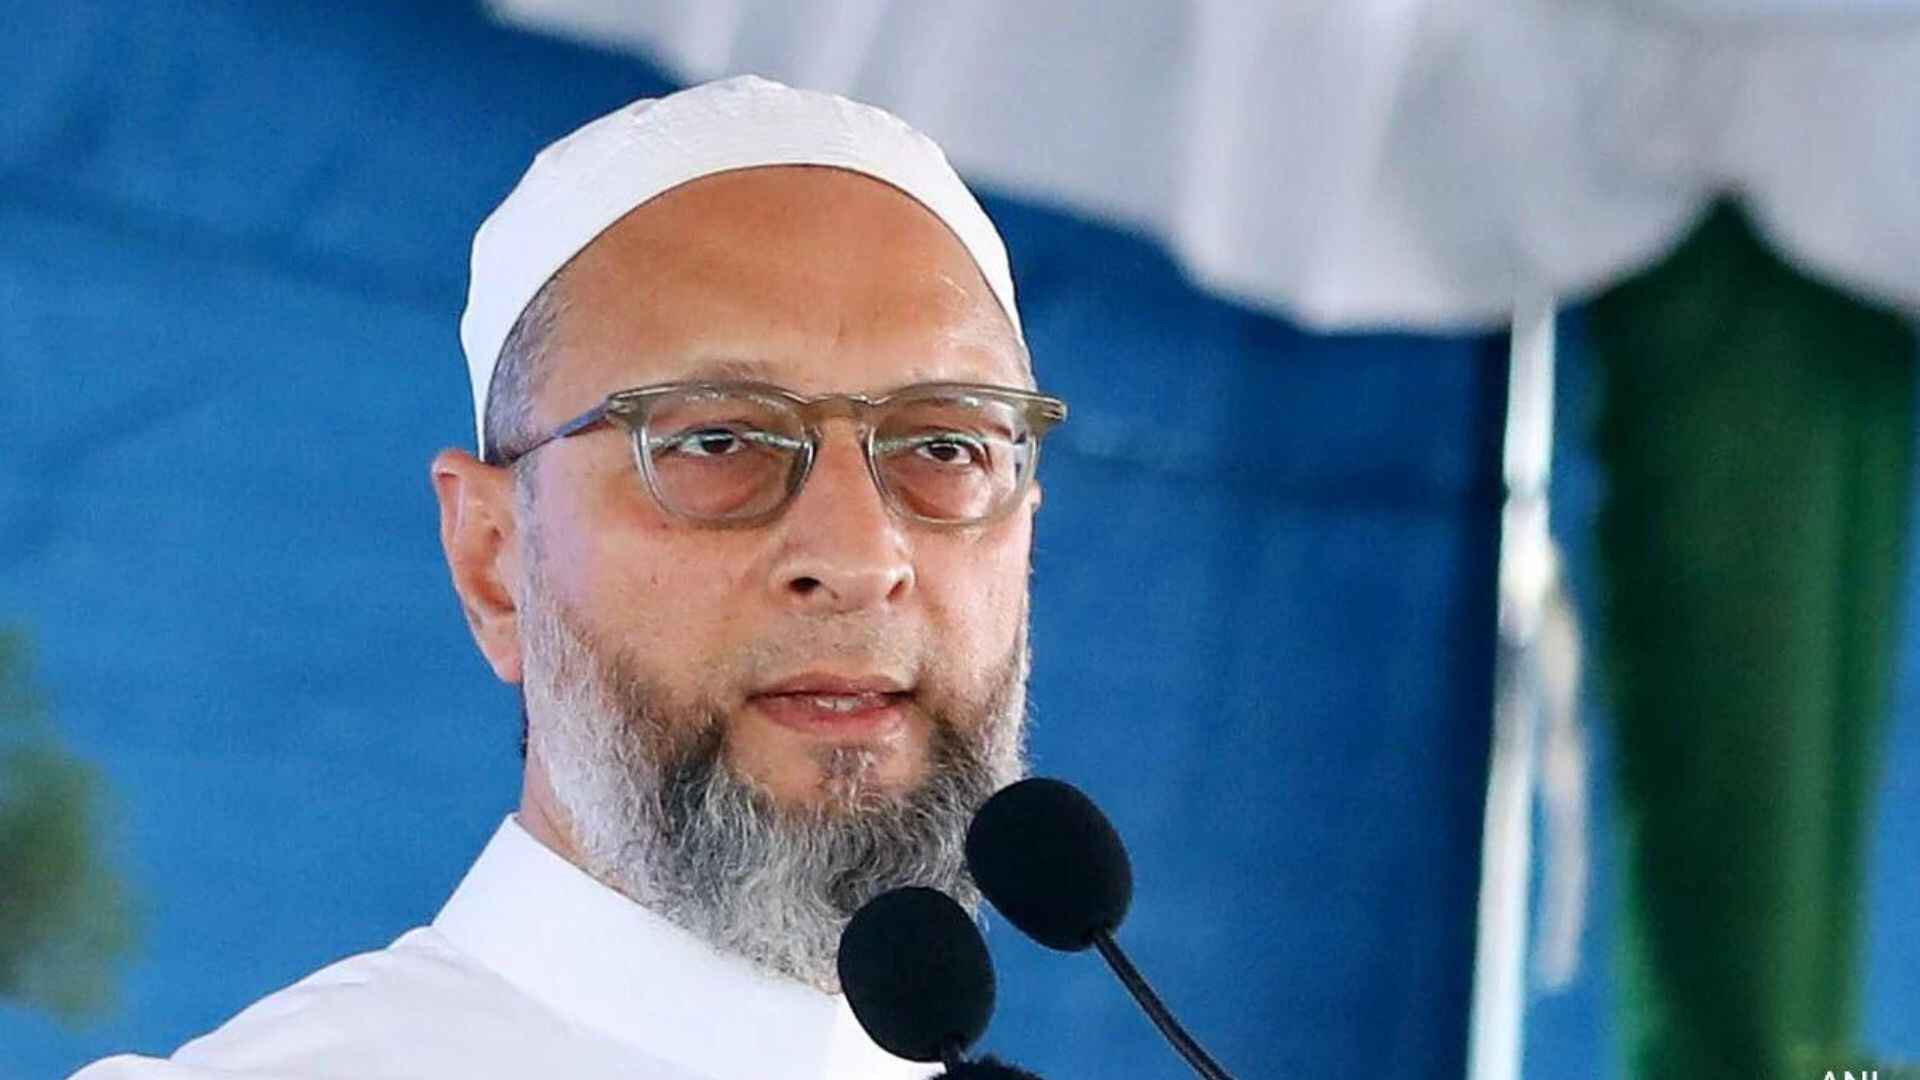 Asaduddin Owaisi Envisions ‘Woman In Hijab’ As India’s First Muslim PM